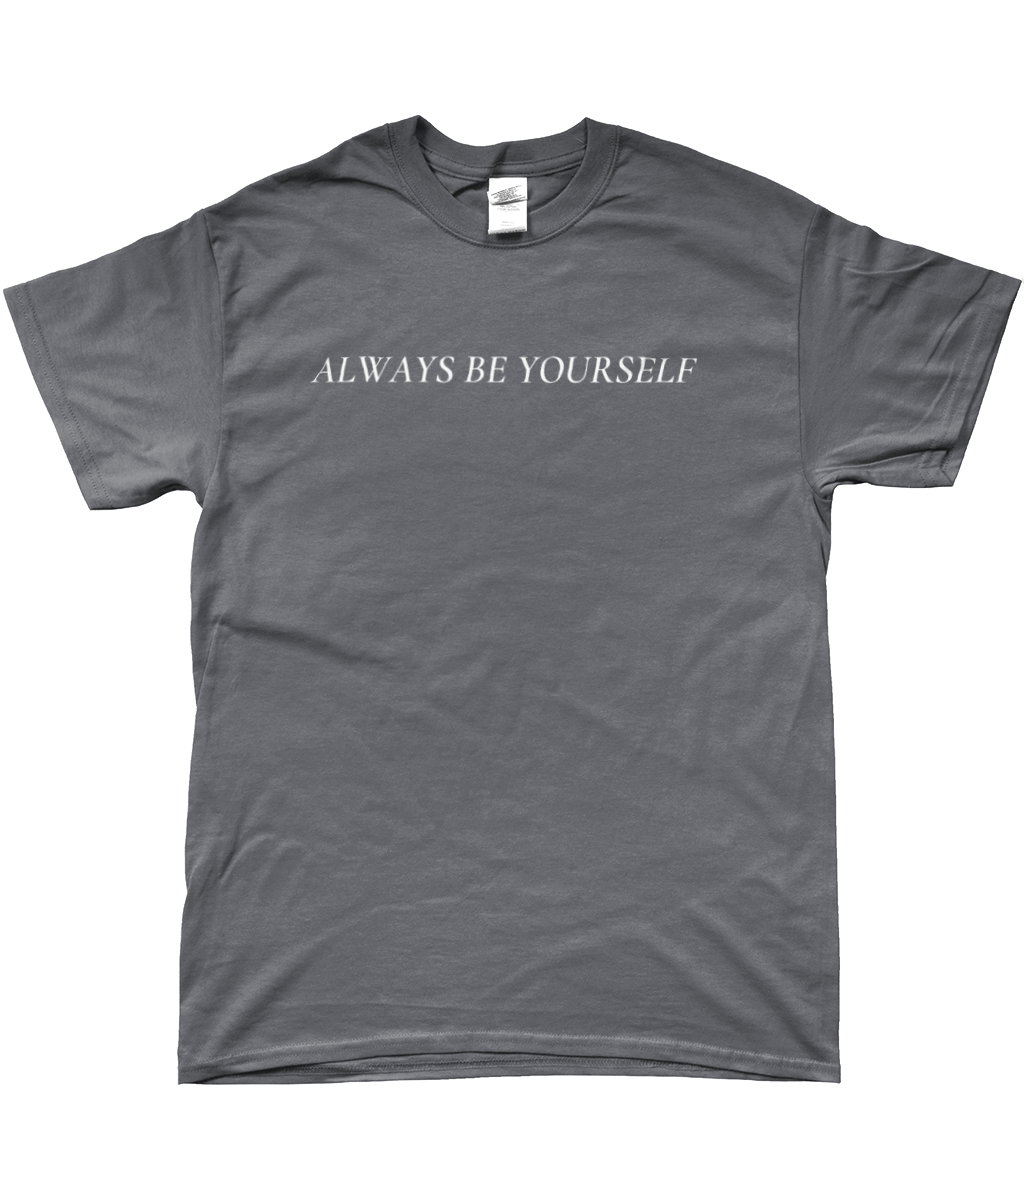 BE YOURSELF T-SHIRT